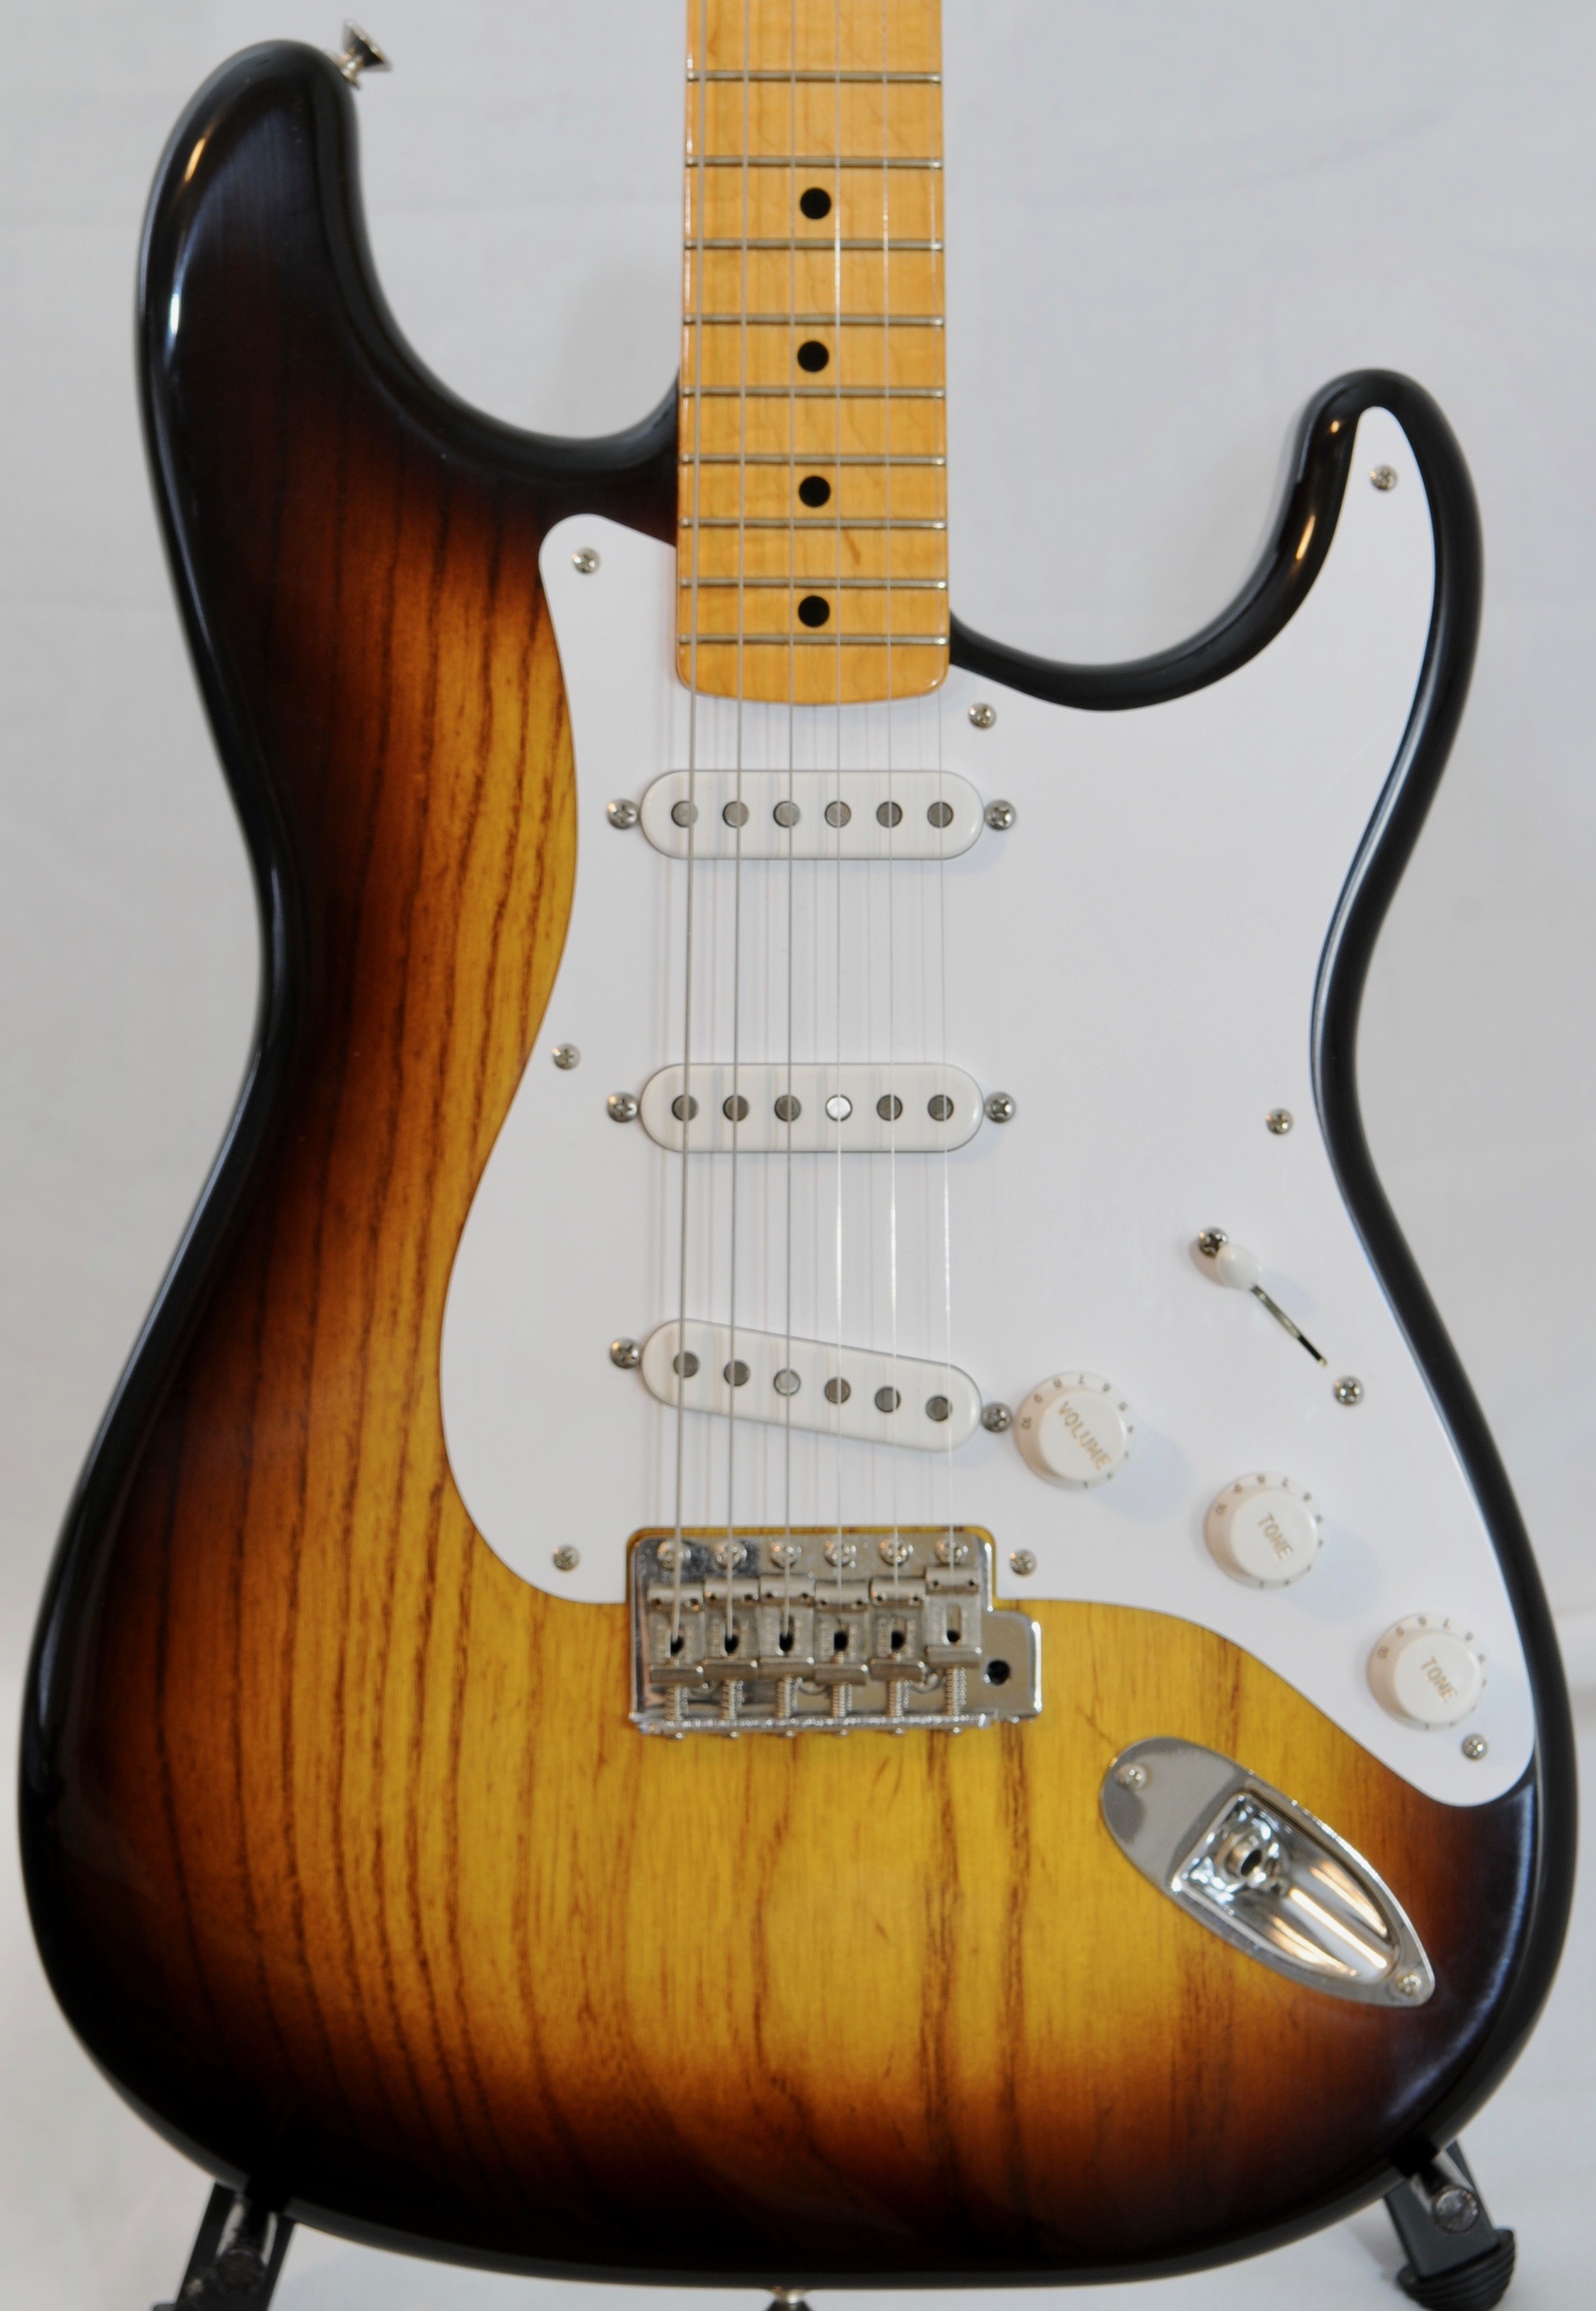 Gil Yaron STRAT – Just 7 pounds!  Near Mint Condition